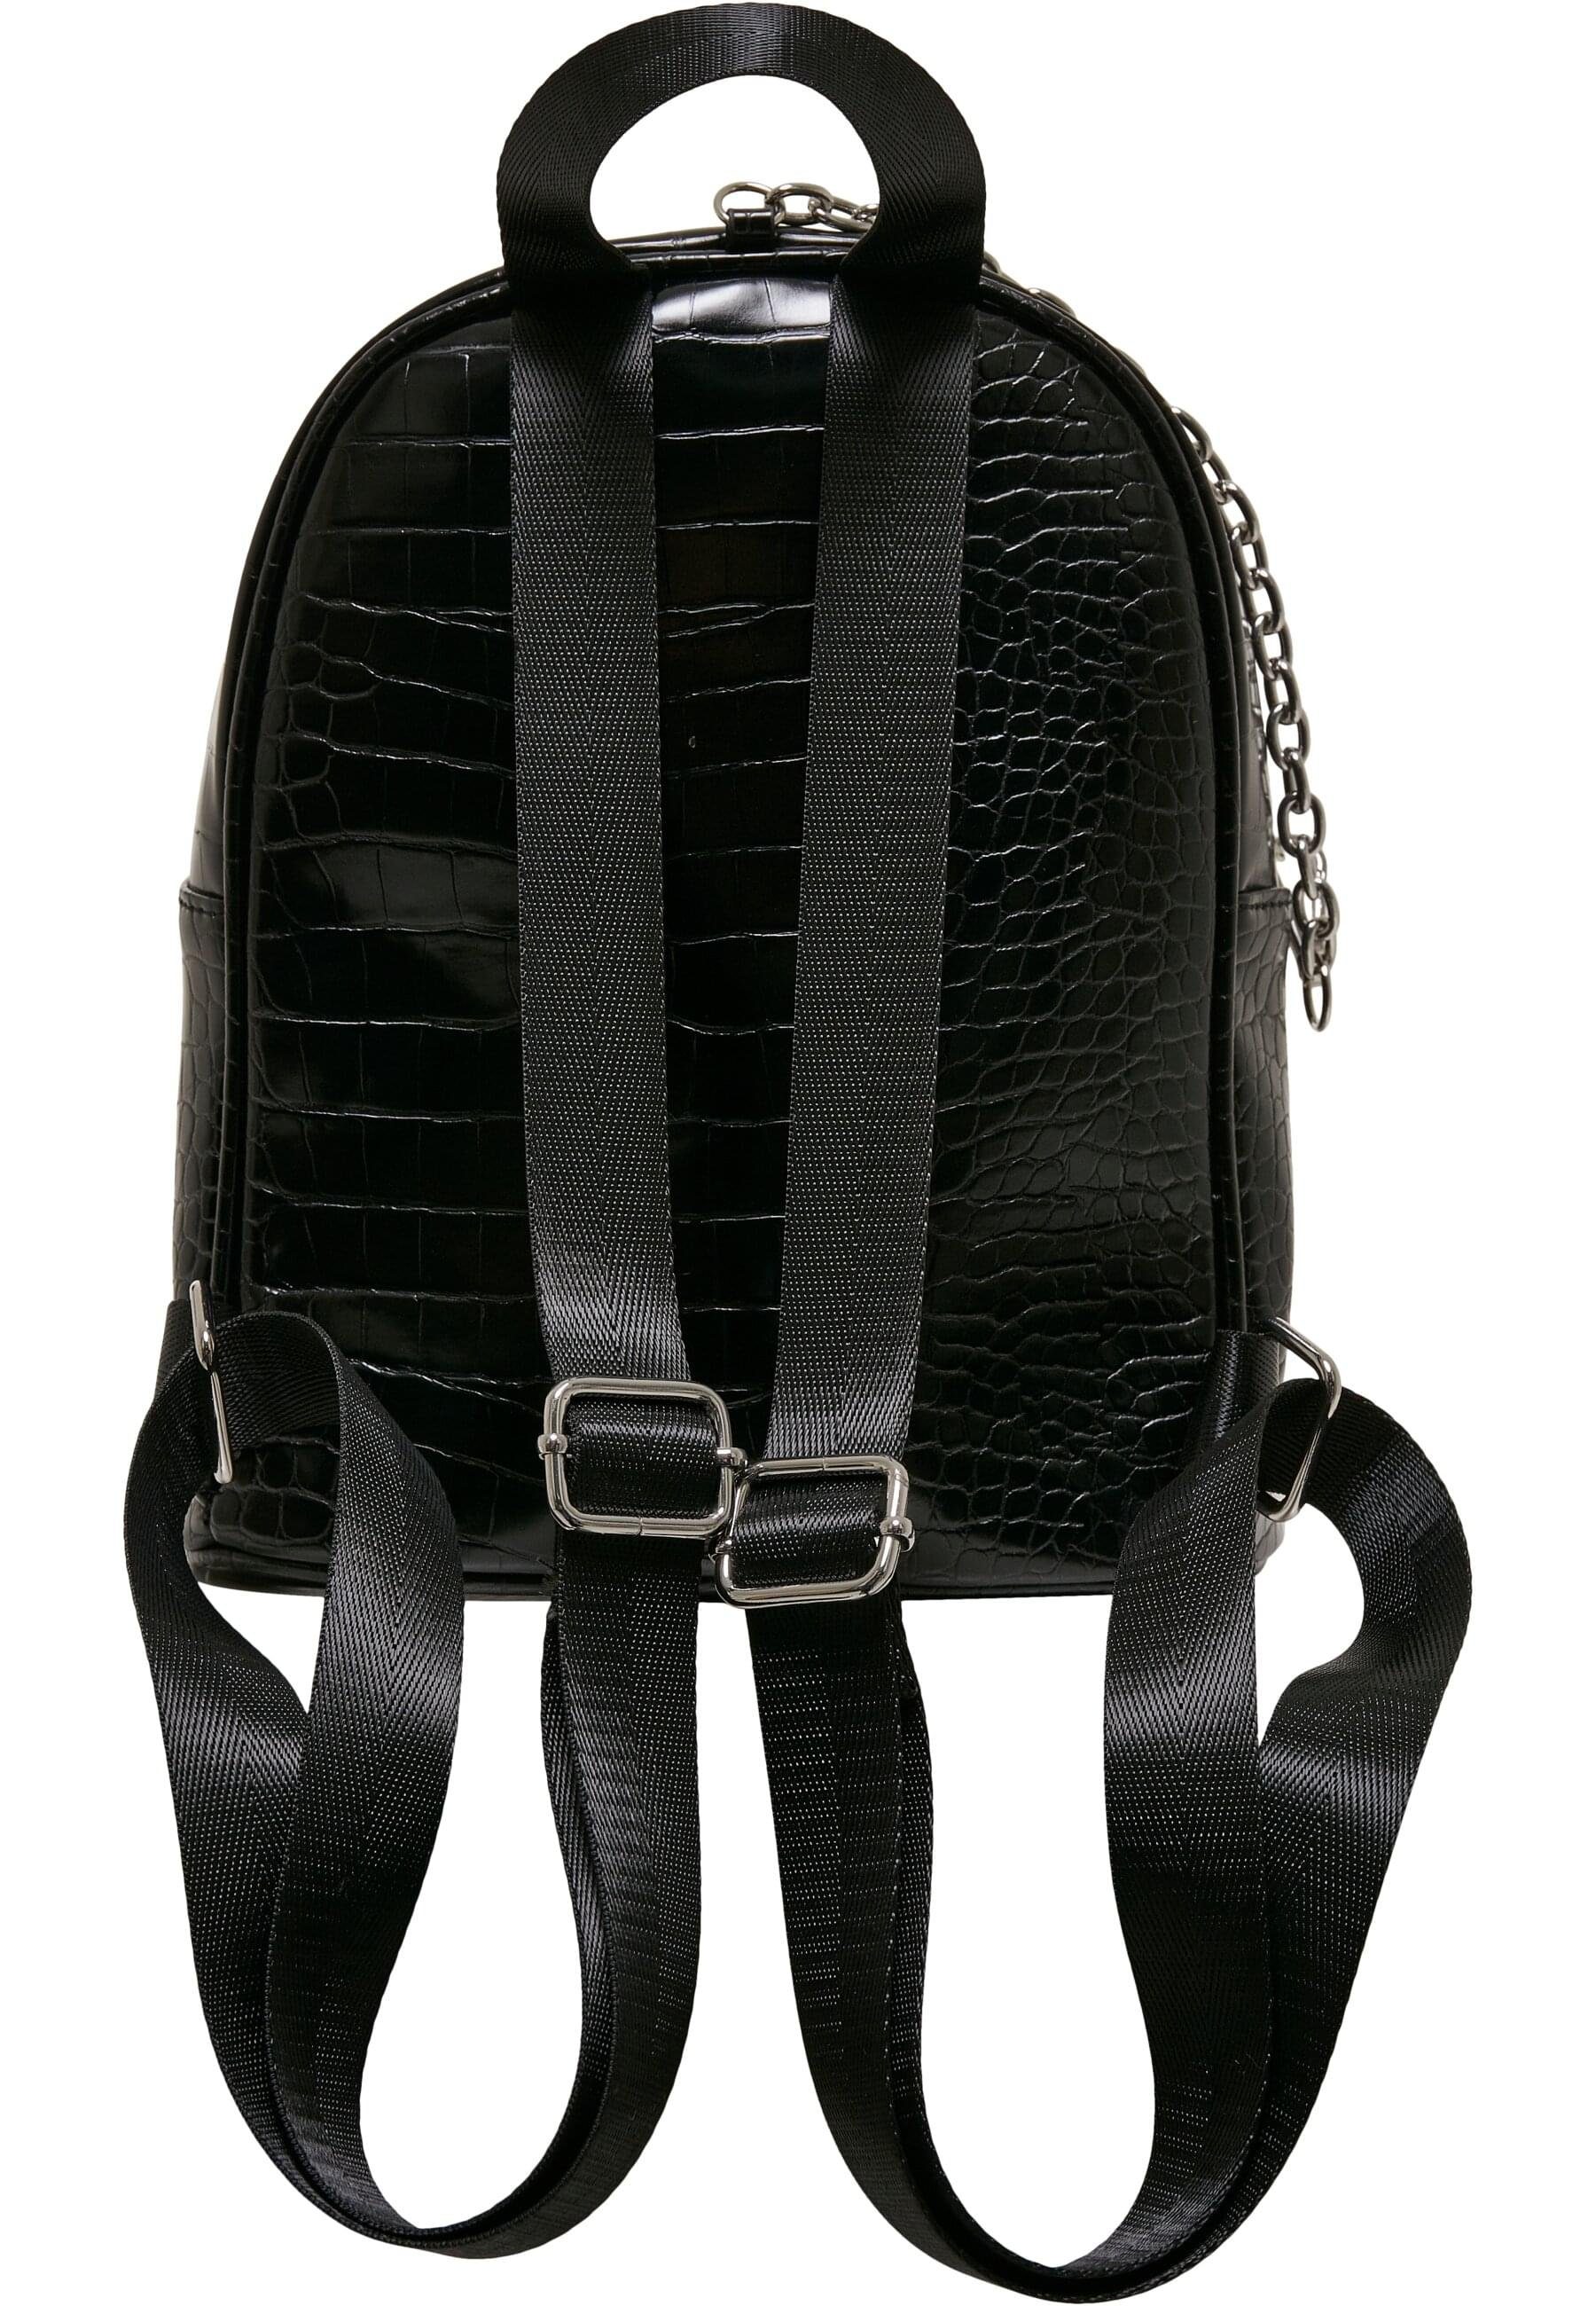 URBAN CLASSICS Rucksack Unisex Croco Synthetic Backpack Leather